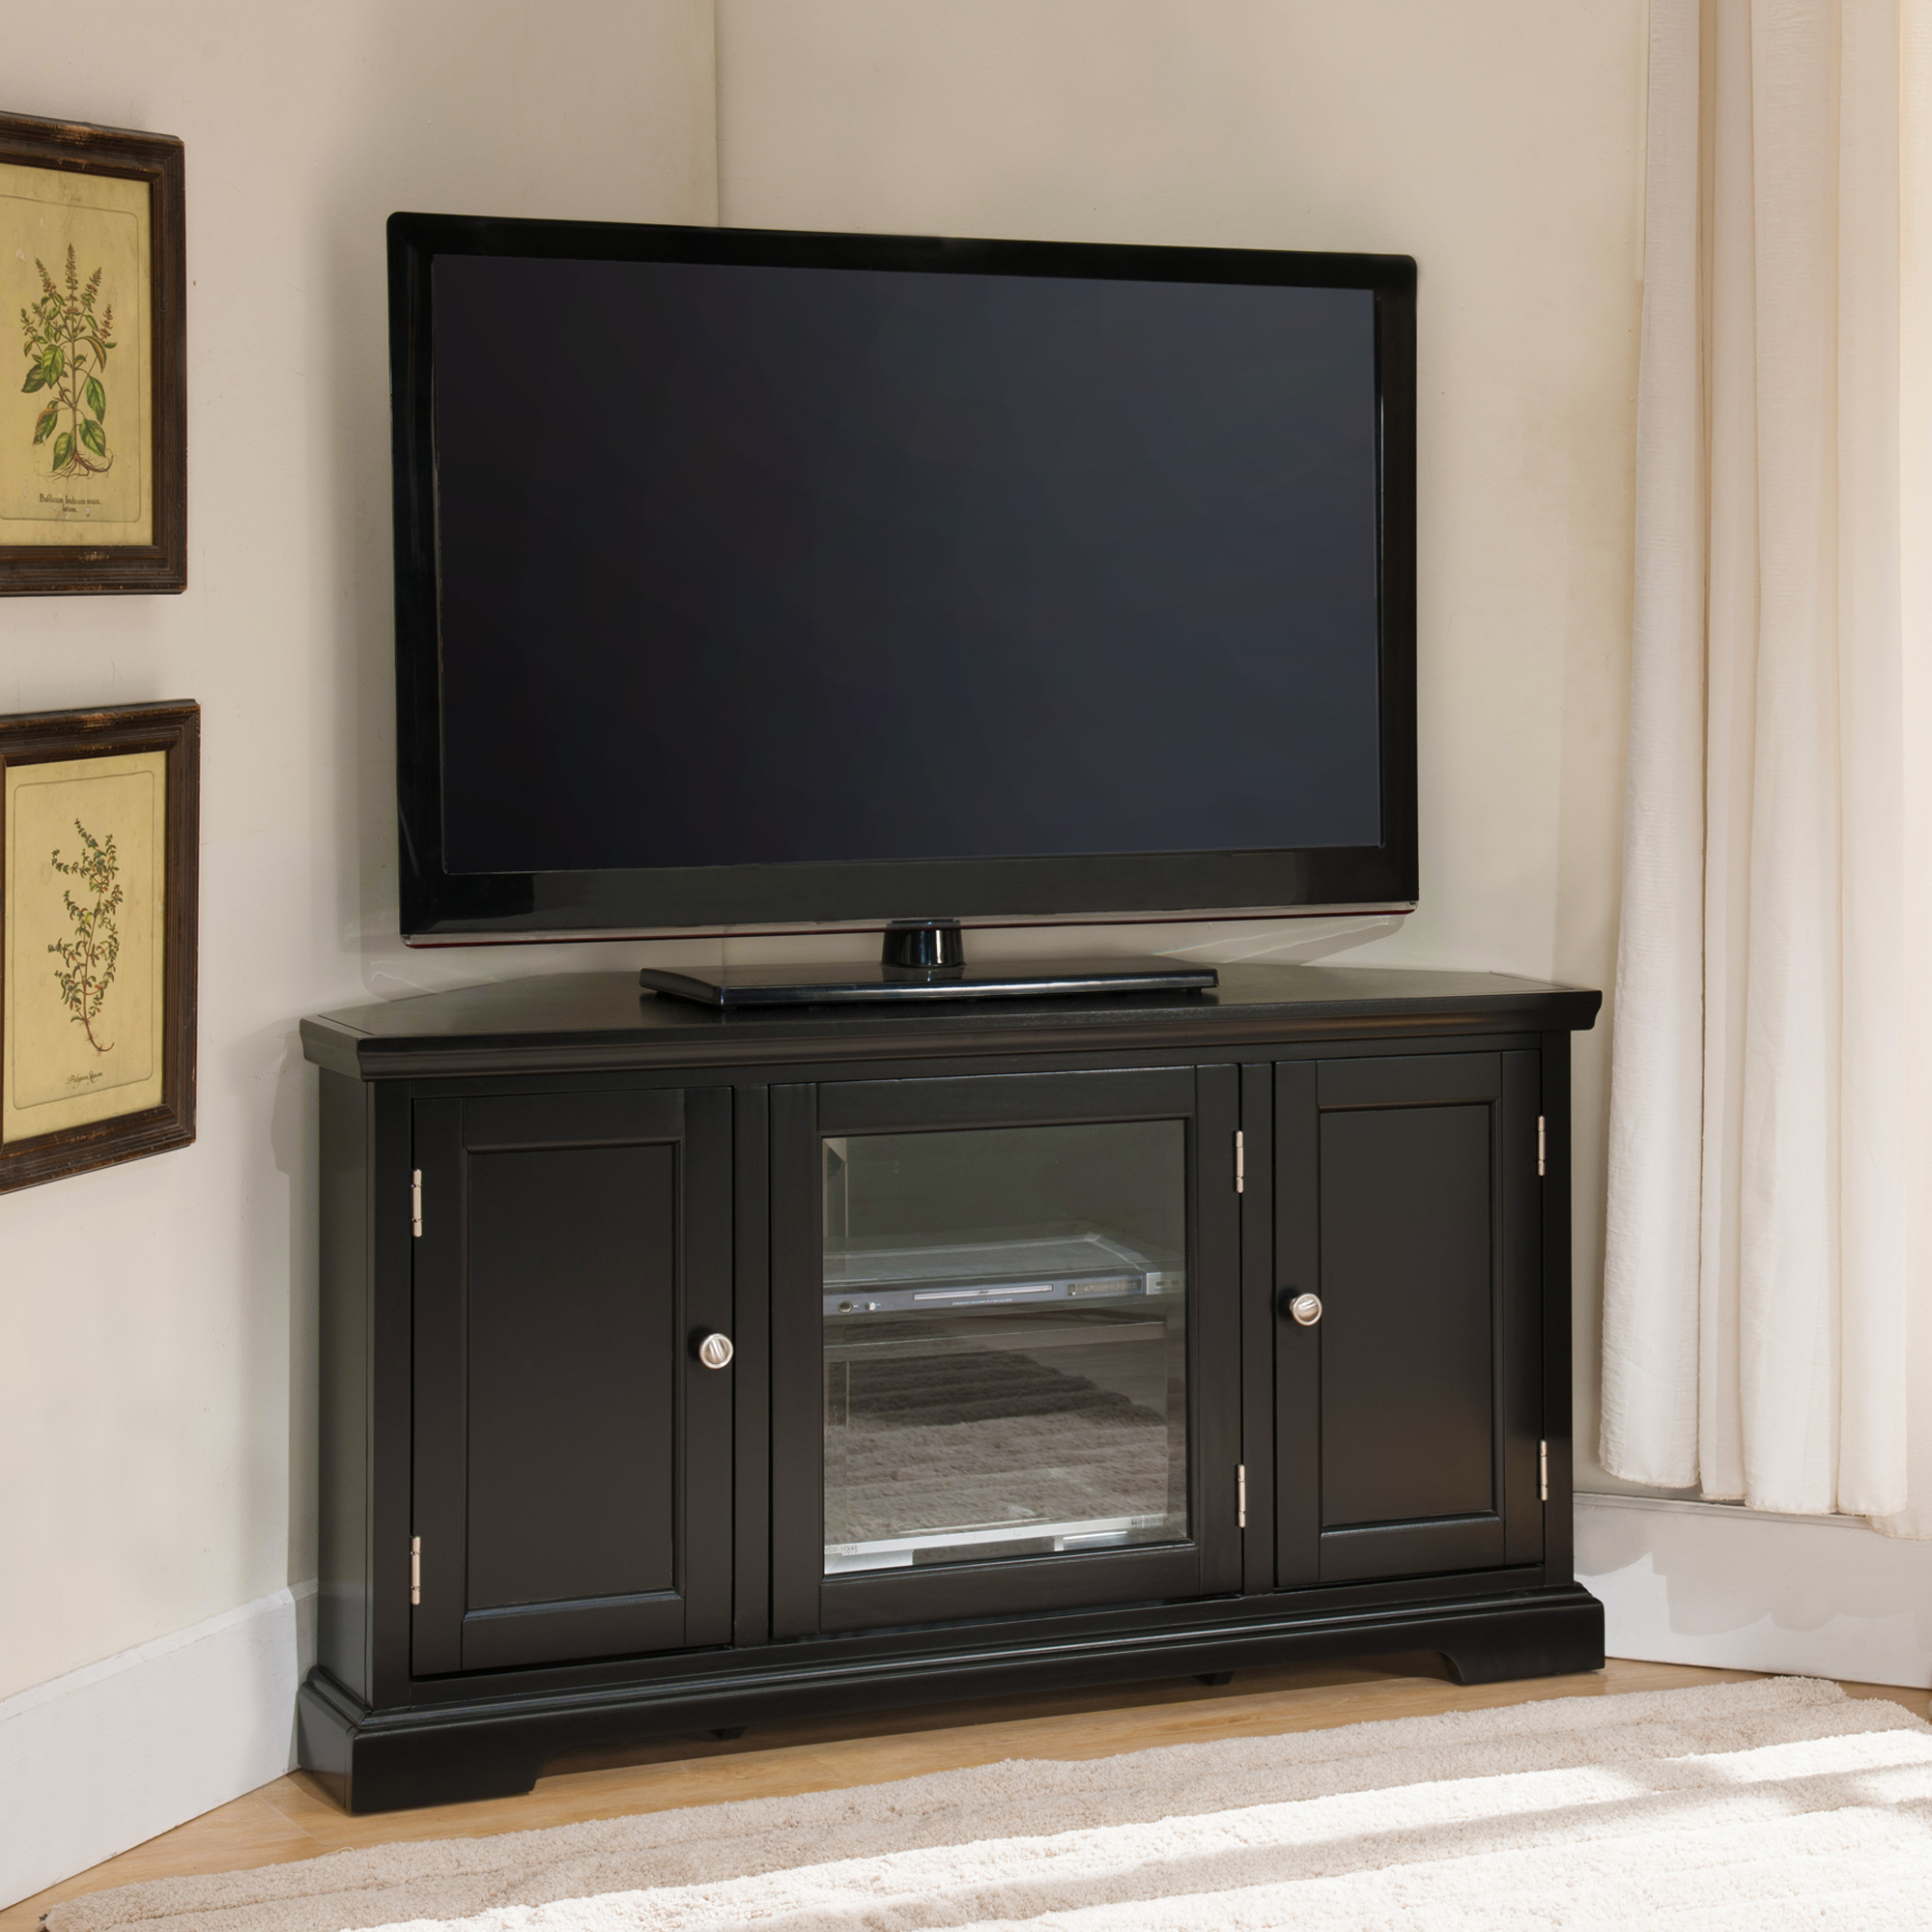 Leick Home 83385 Three Door Corner TV Stand with Cabinet Storage For 50" TV's, Black - image 1 of 13